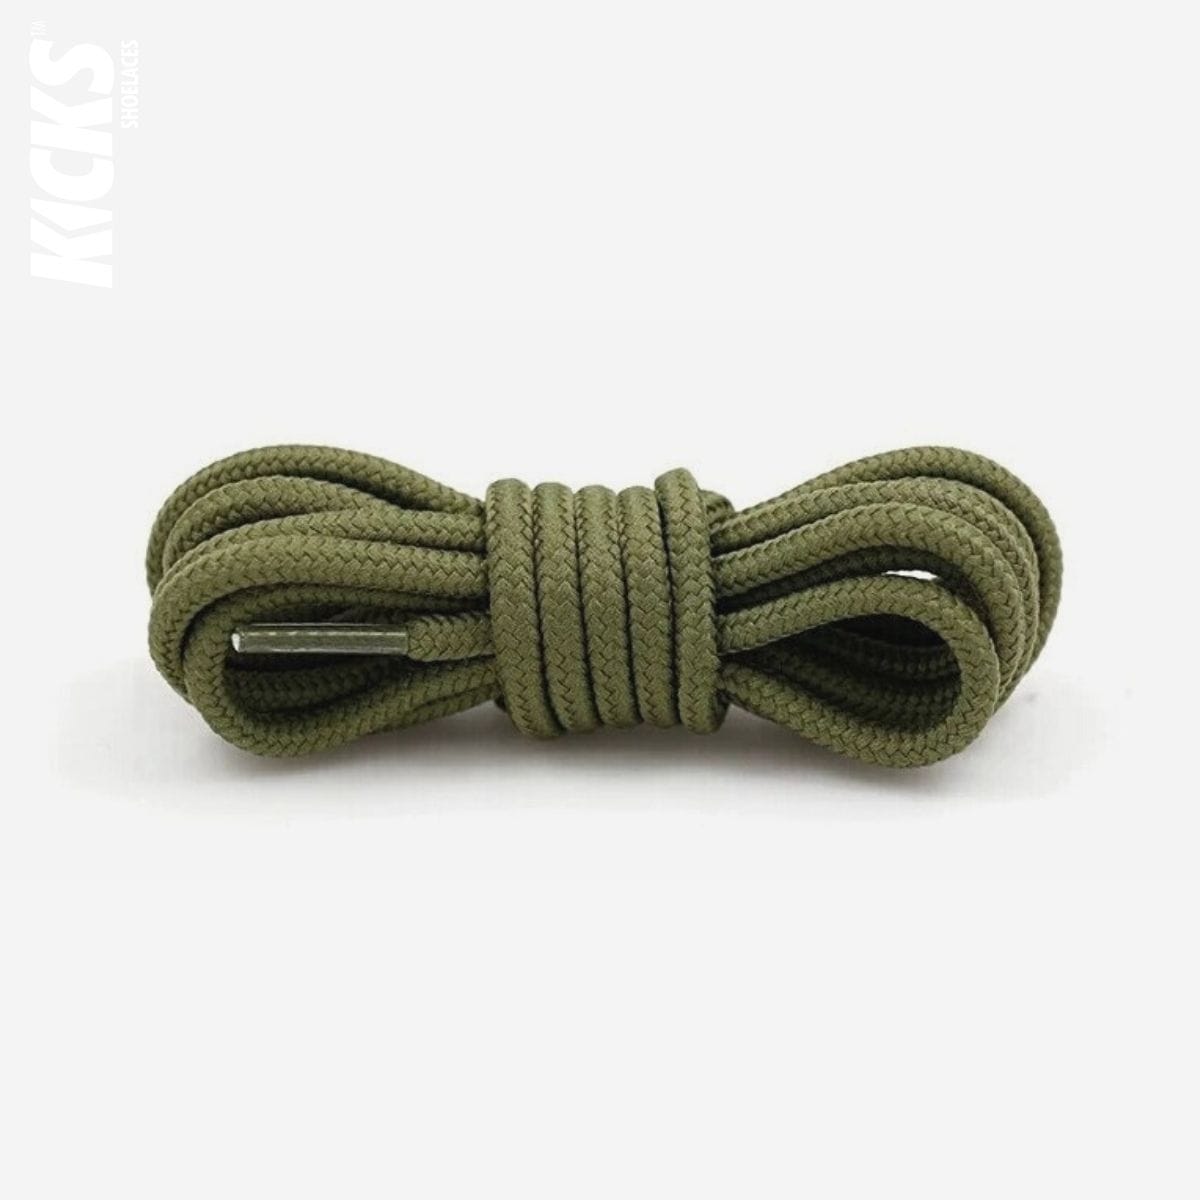 colored-shoelaces-for-cool-ways-to-tie-shoe-with-army-green-laces